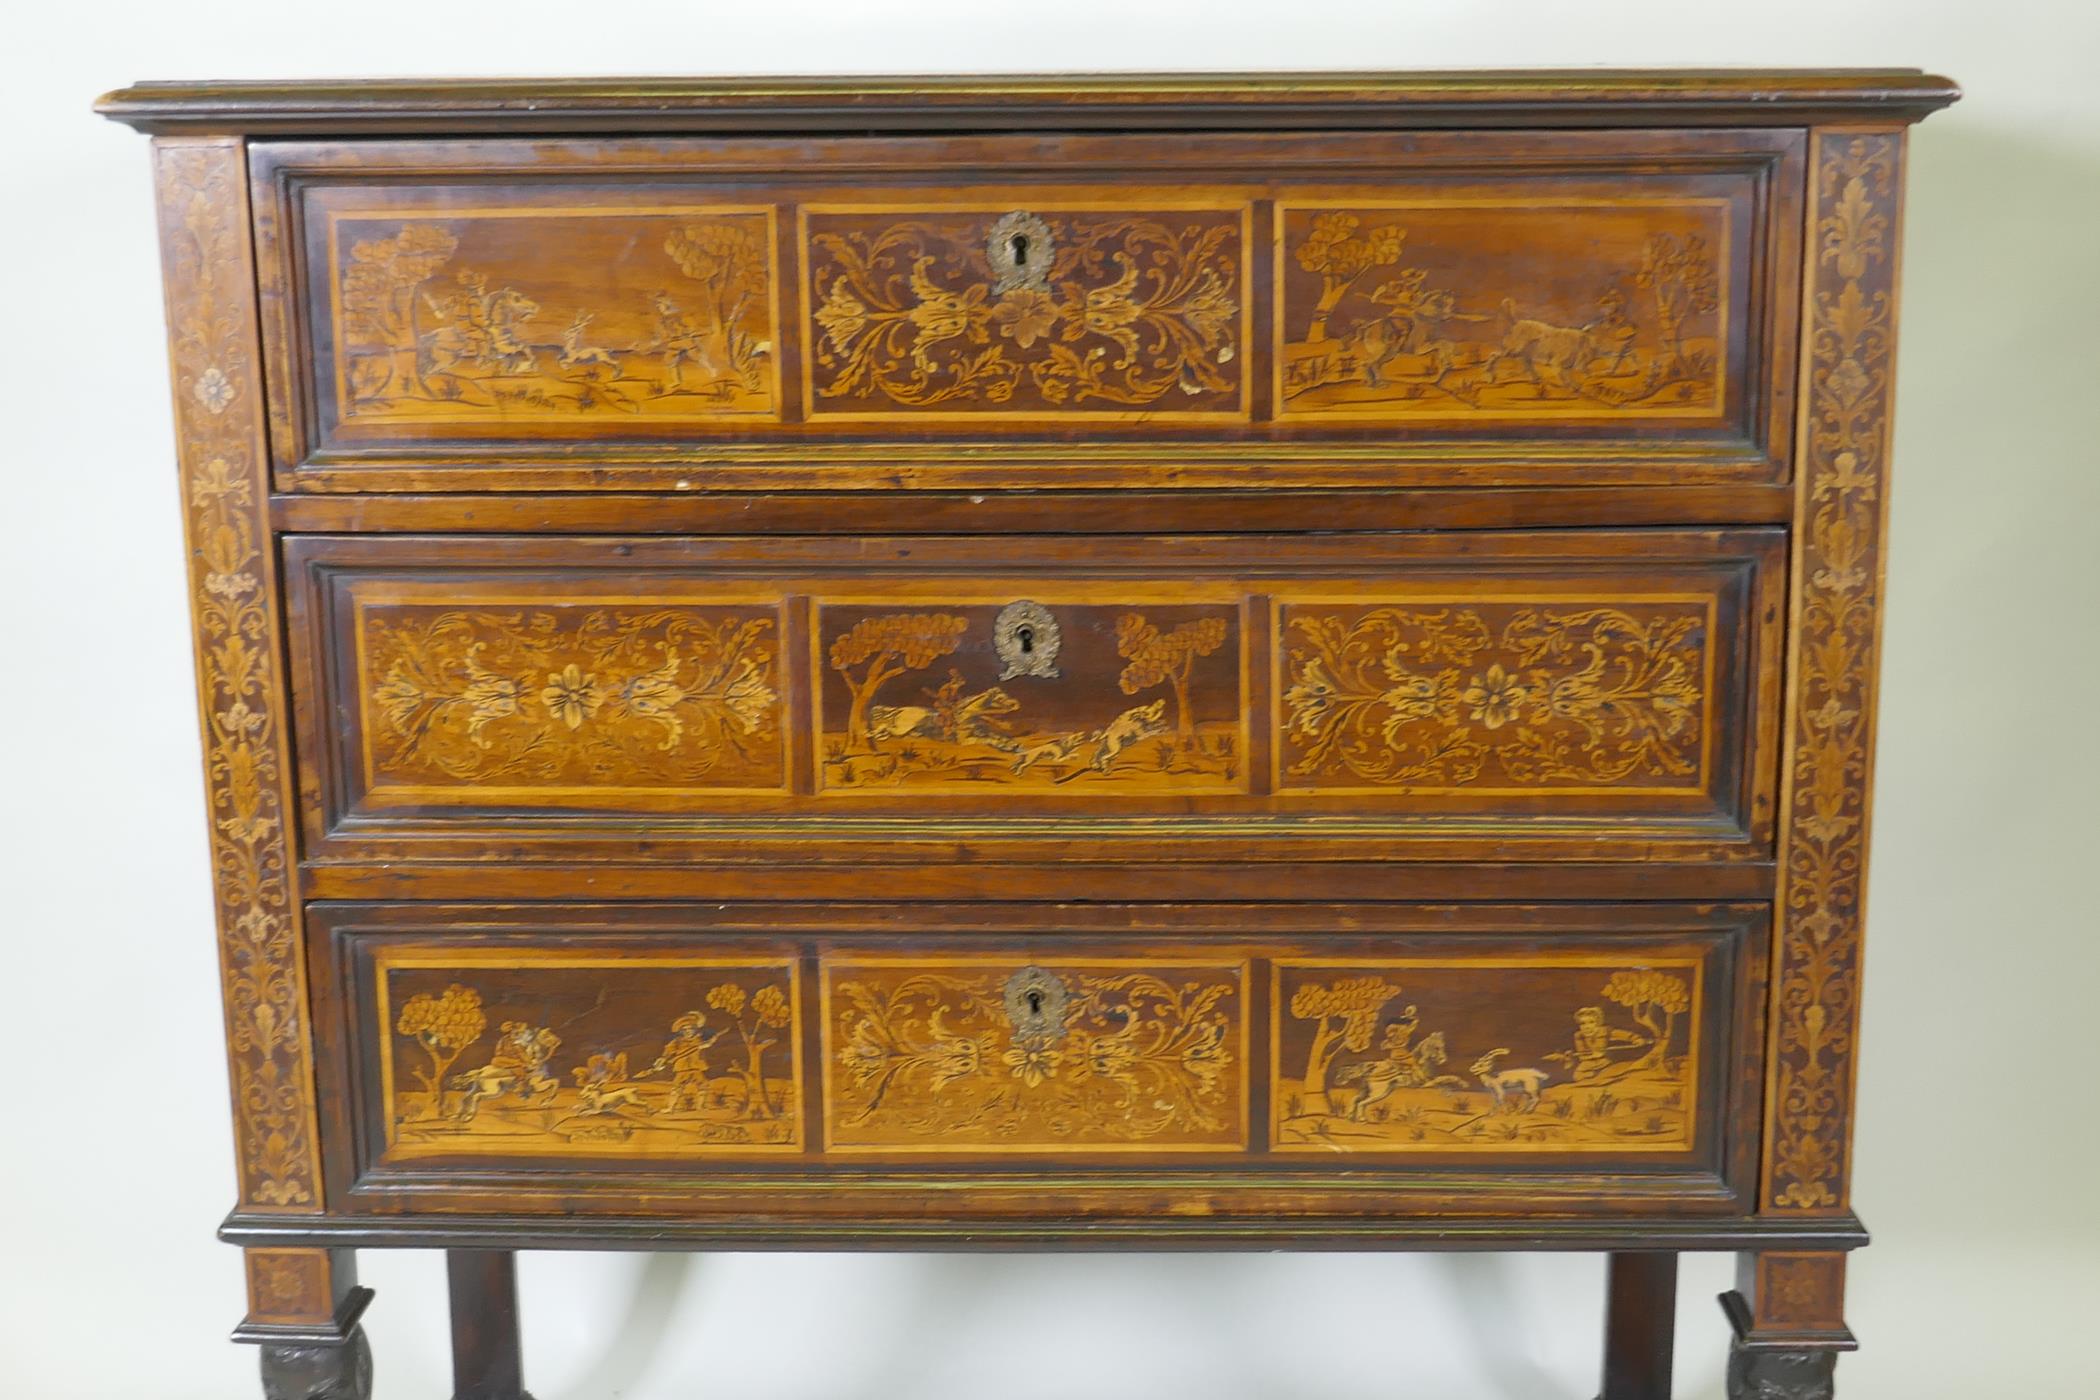 C18th/C19th Italian/Swiss marquetry inlaid walnut chest of three drawers, inlaid with hunting - Image 2 of 10